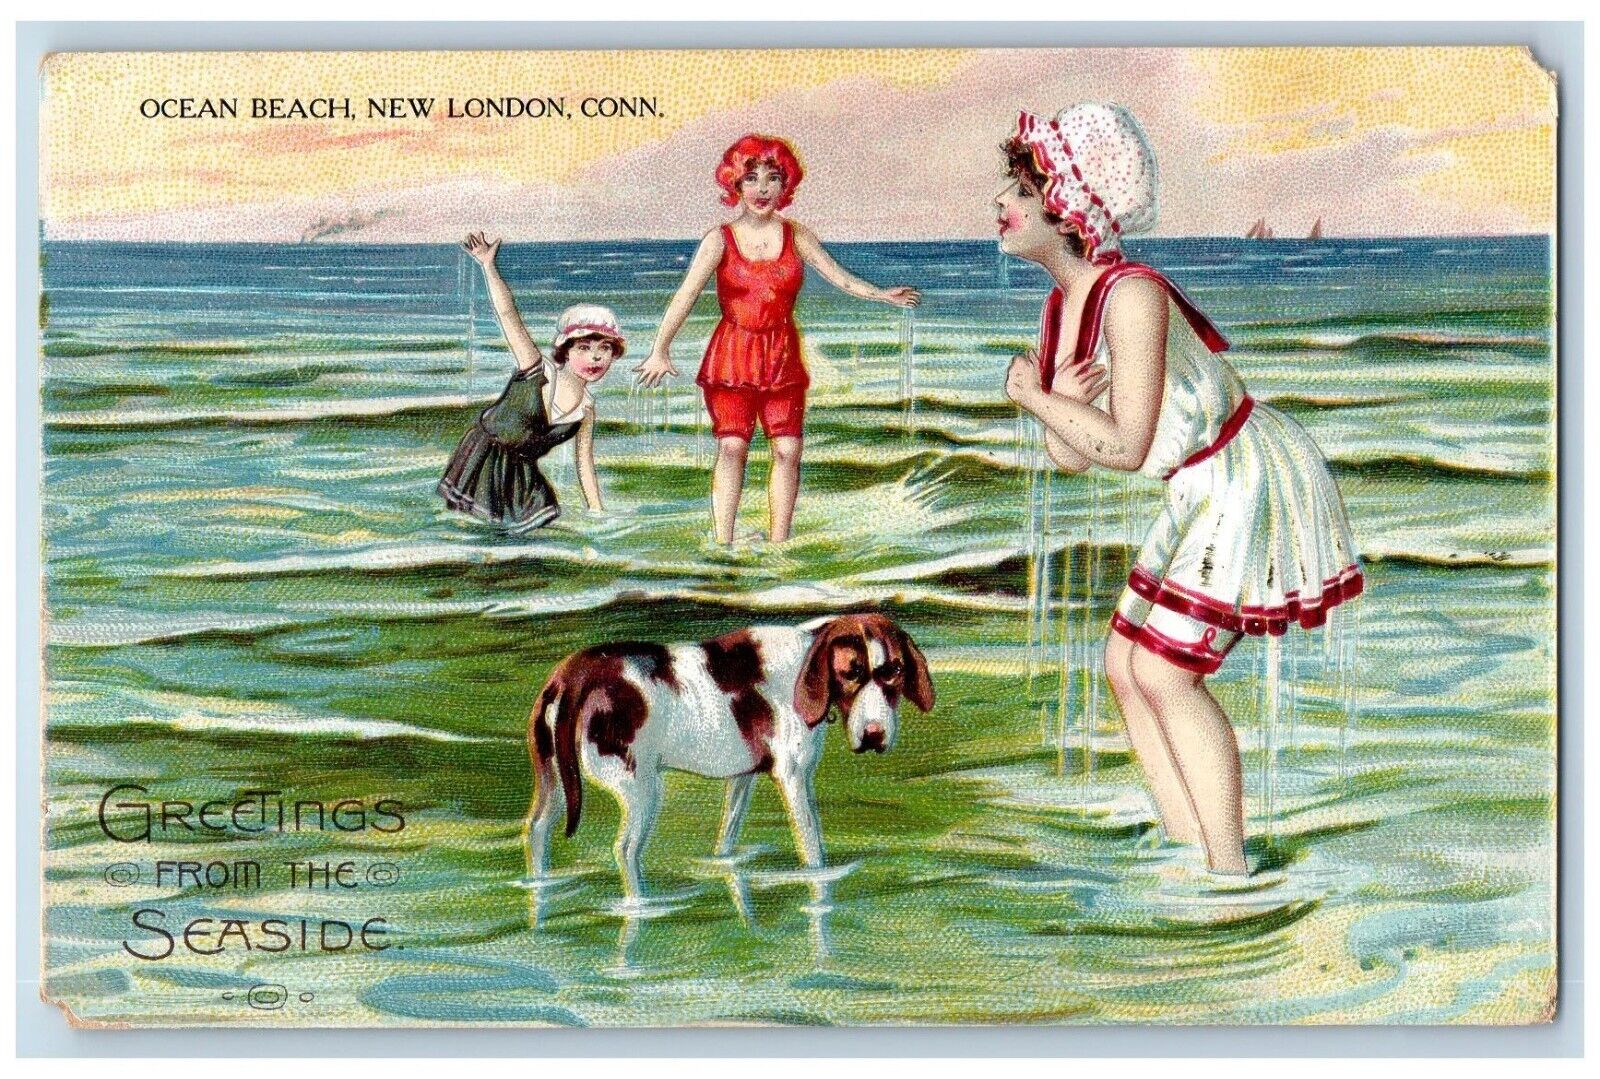 New London Connecticut CT Postcard Greetings From The Seaside Ocean Beach Tuck